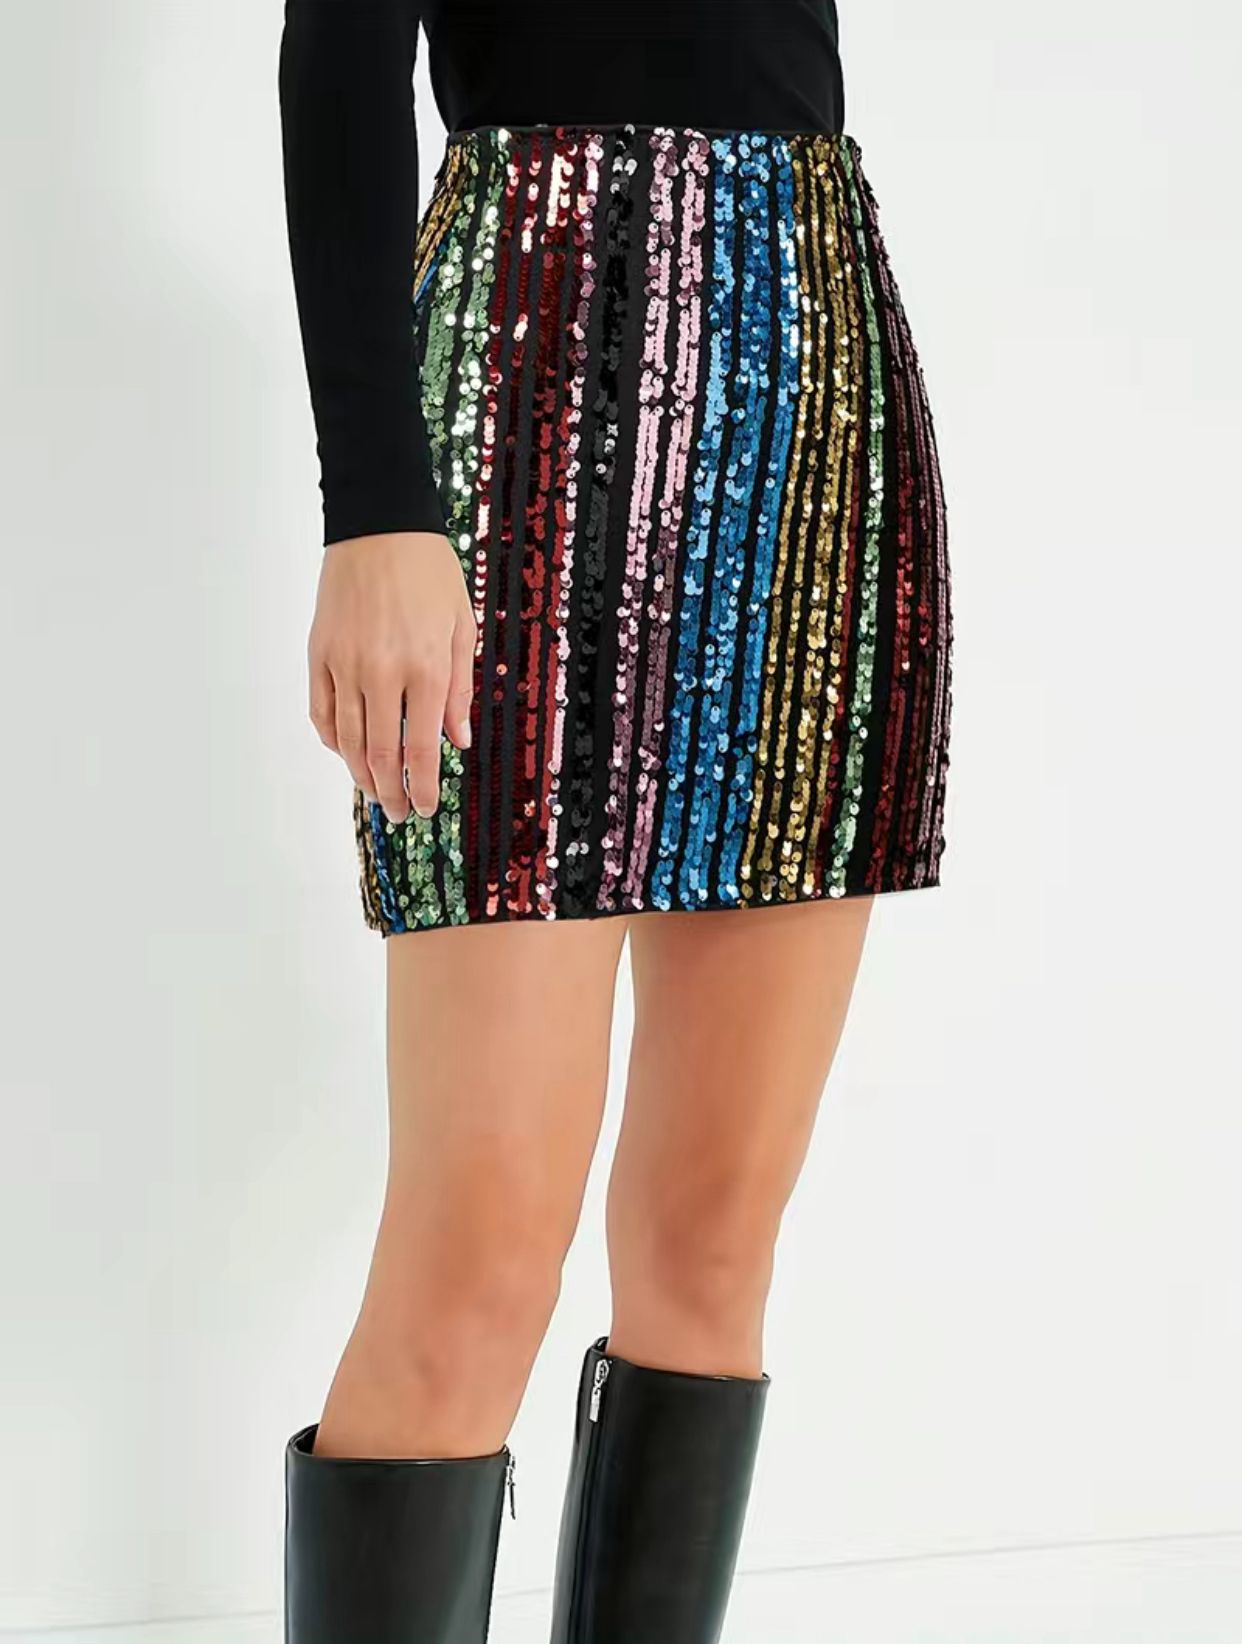 Multicolored Sequined High Waist Skirt